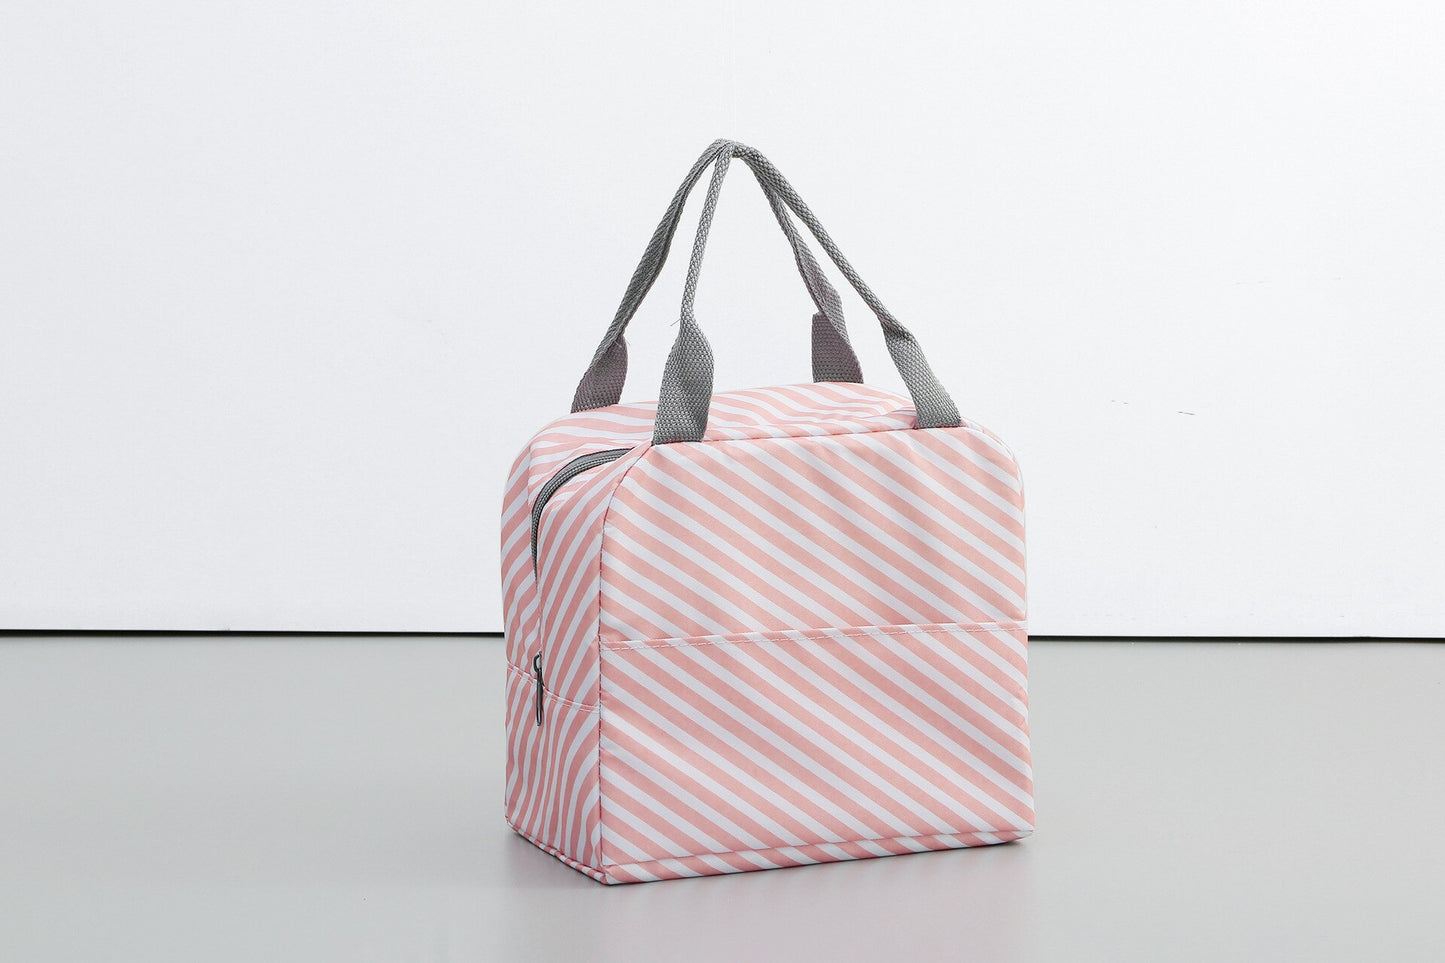 Functional Portable Insulated Canvas Lunch Bag